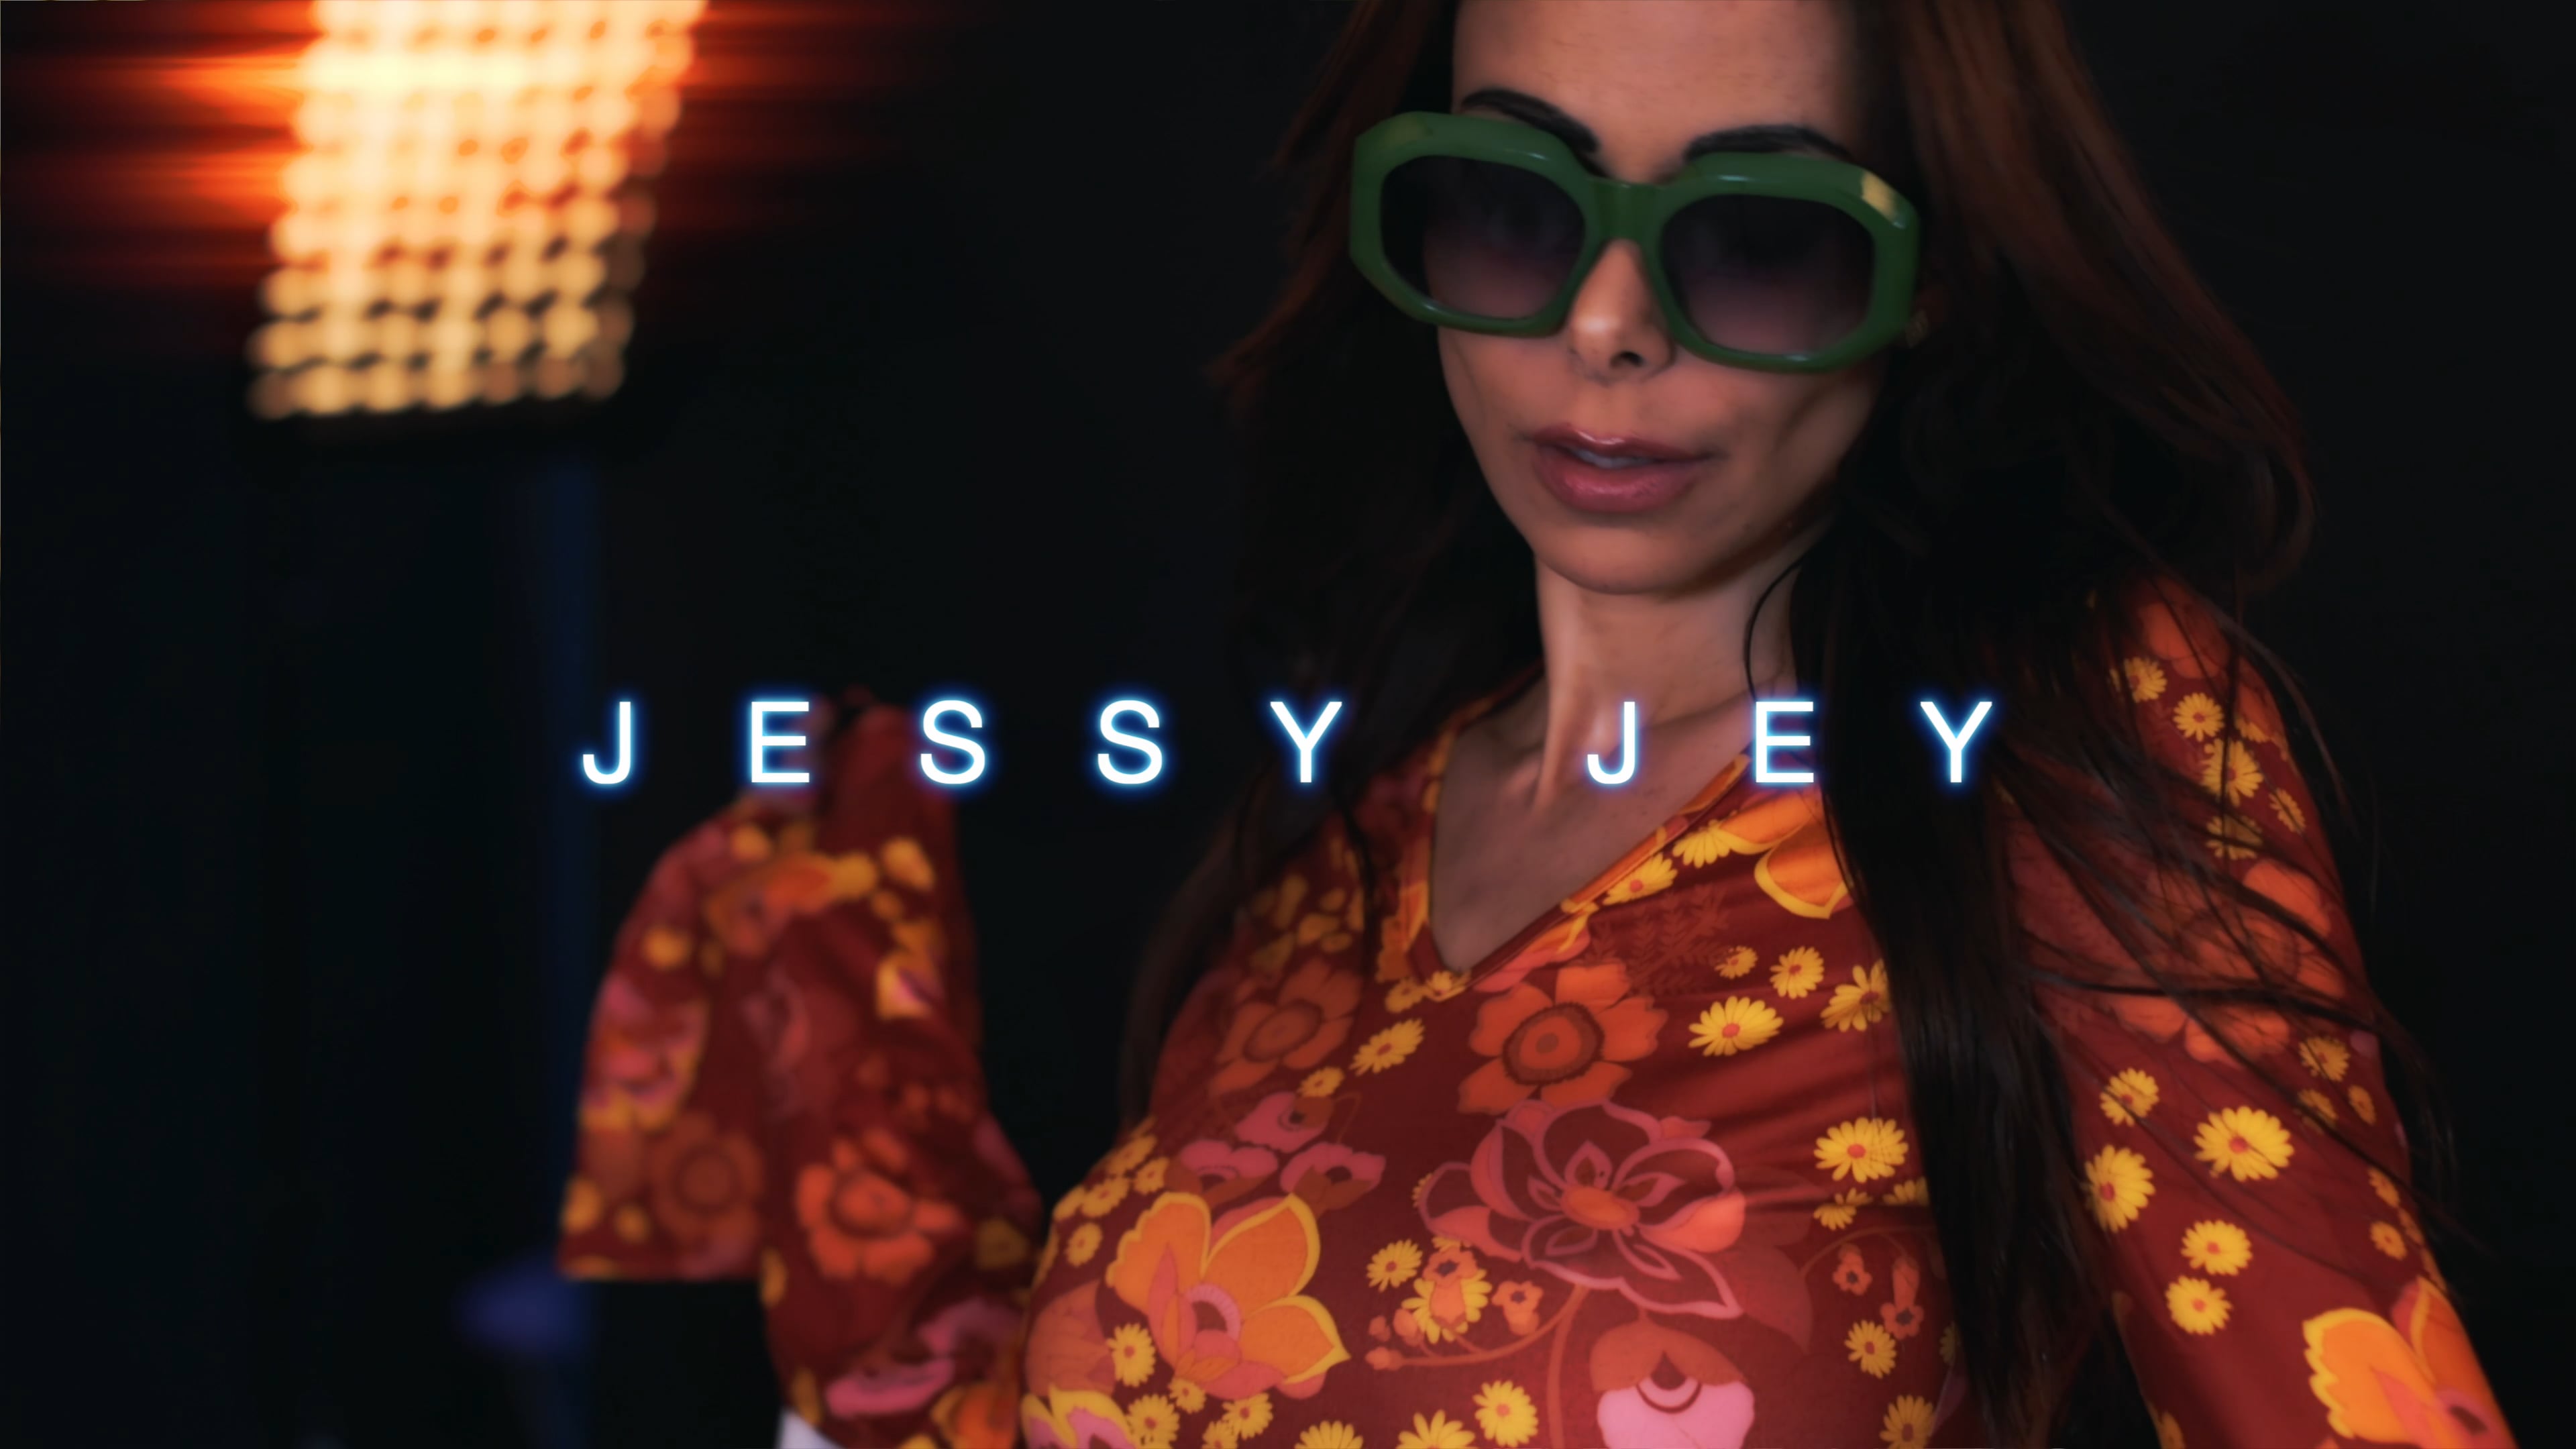 Jessy Jey Video And Editing By Loris Gonfiotti Limited On Vimeo